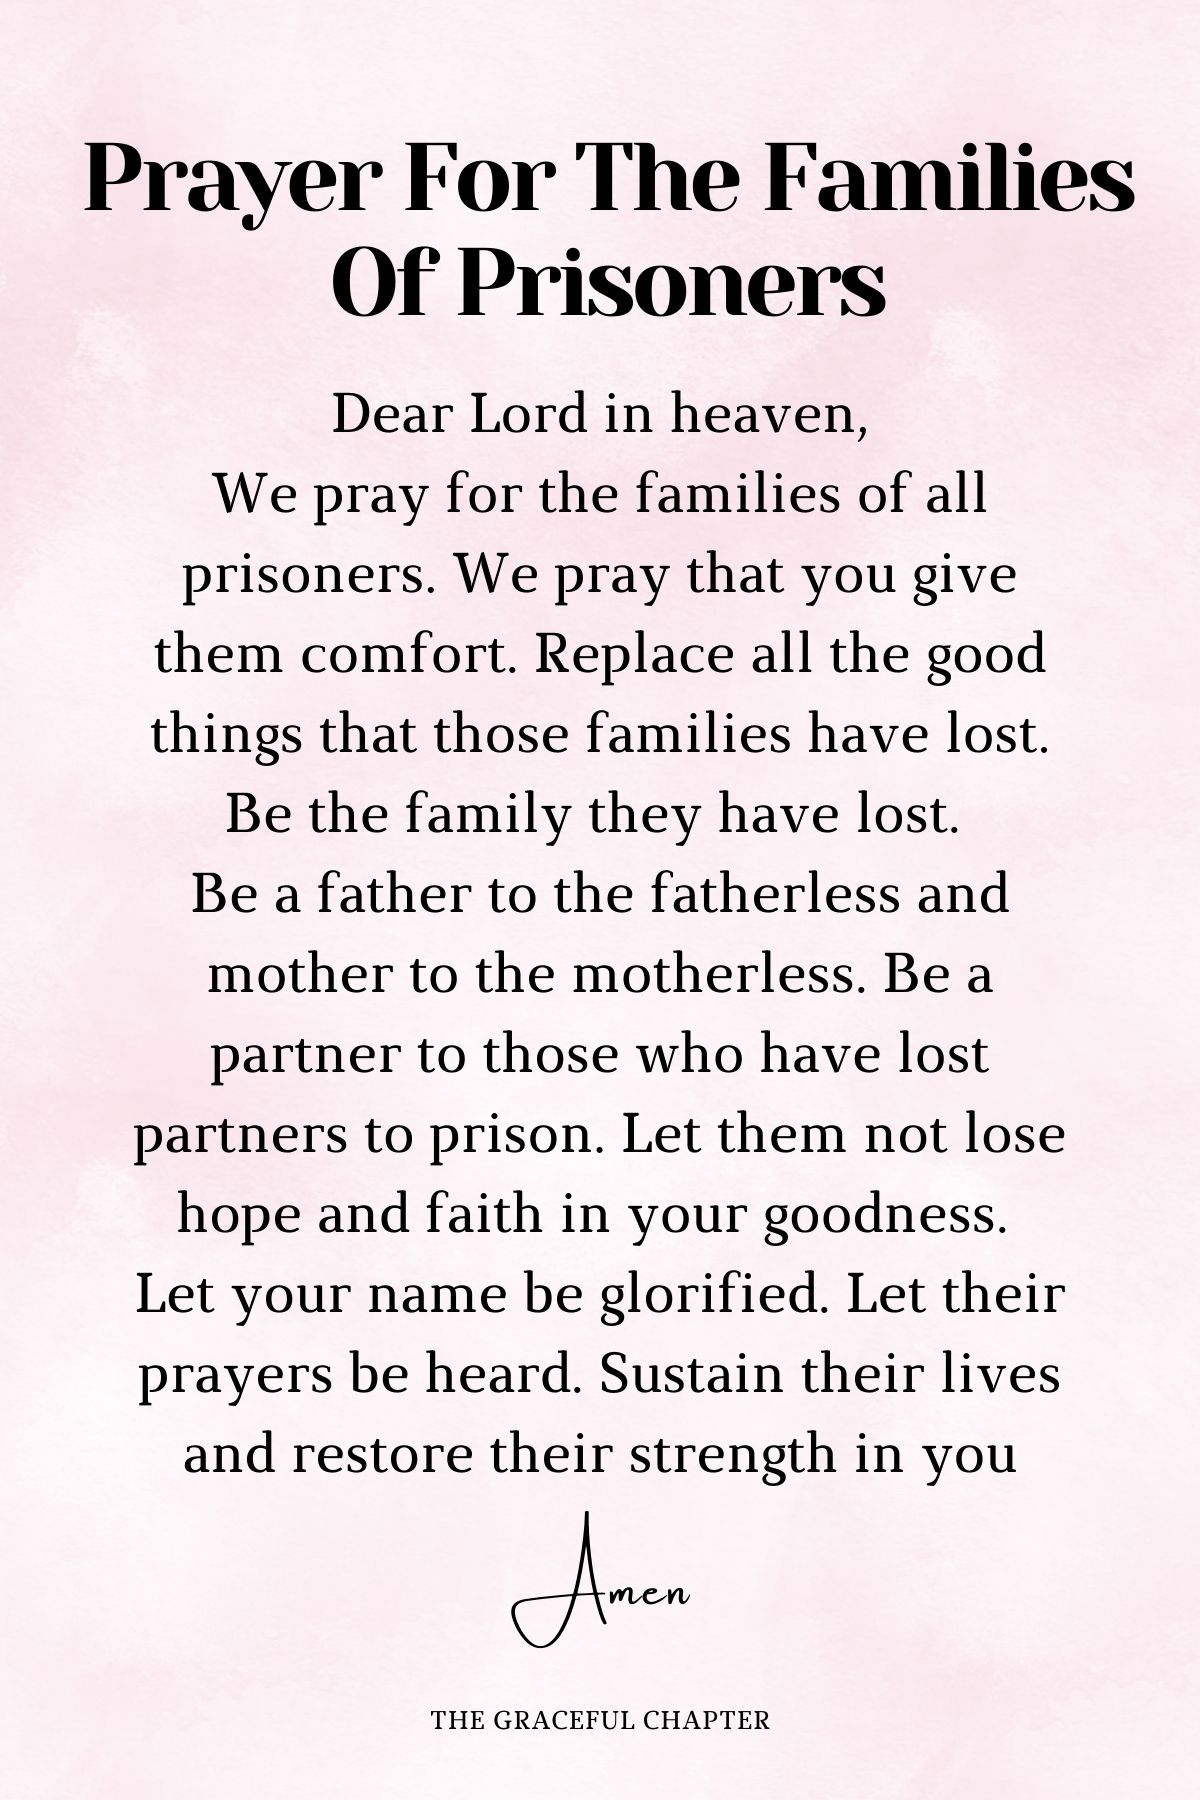 Prayer for the families of prisoners